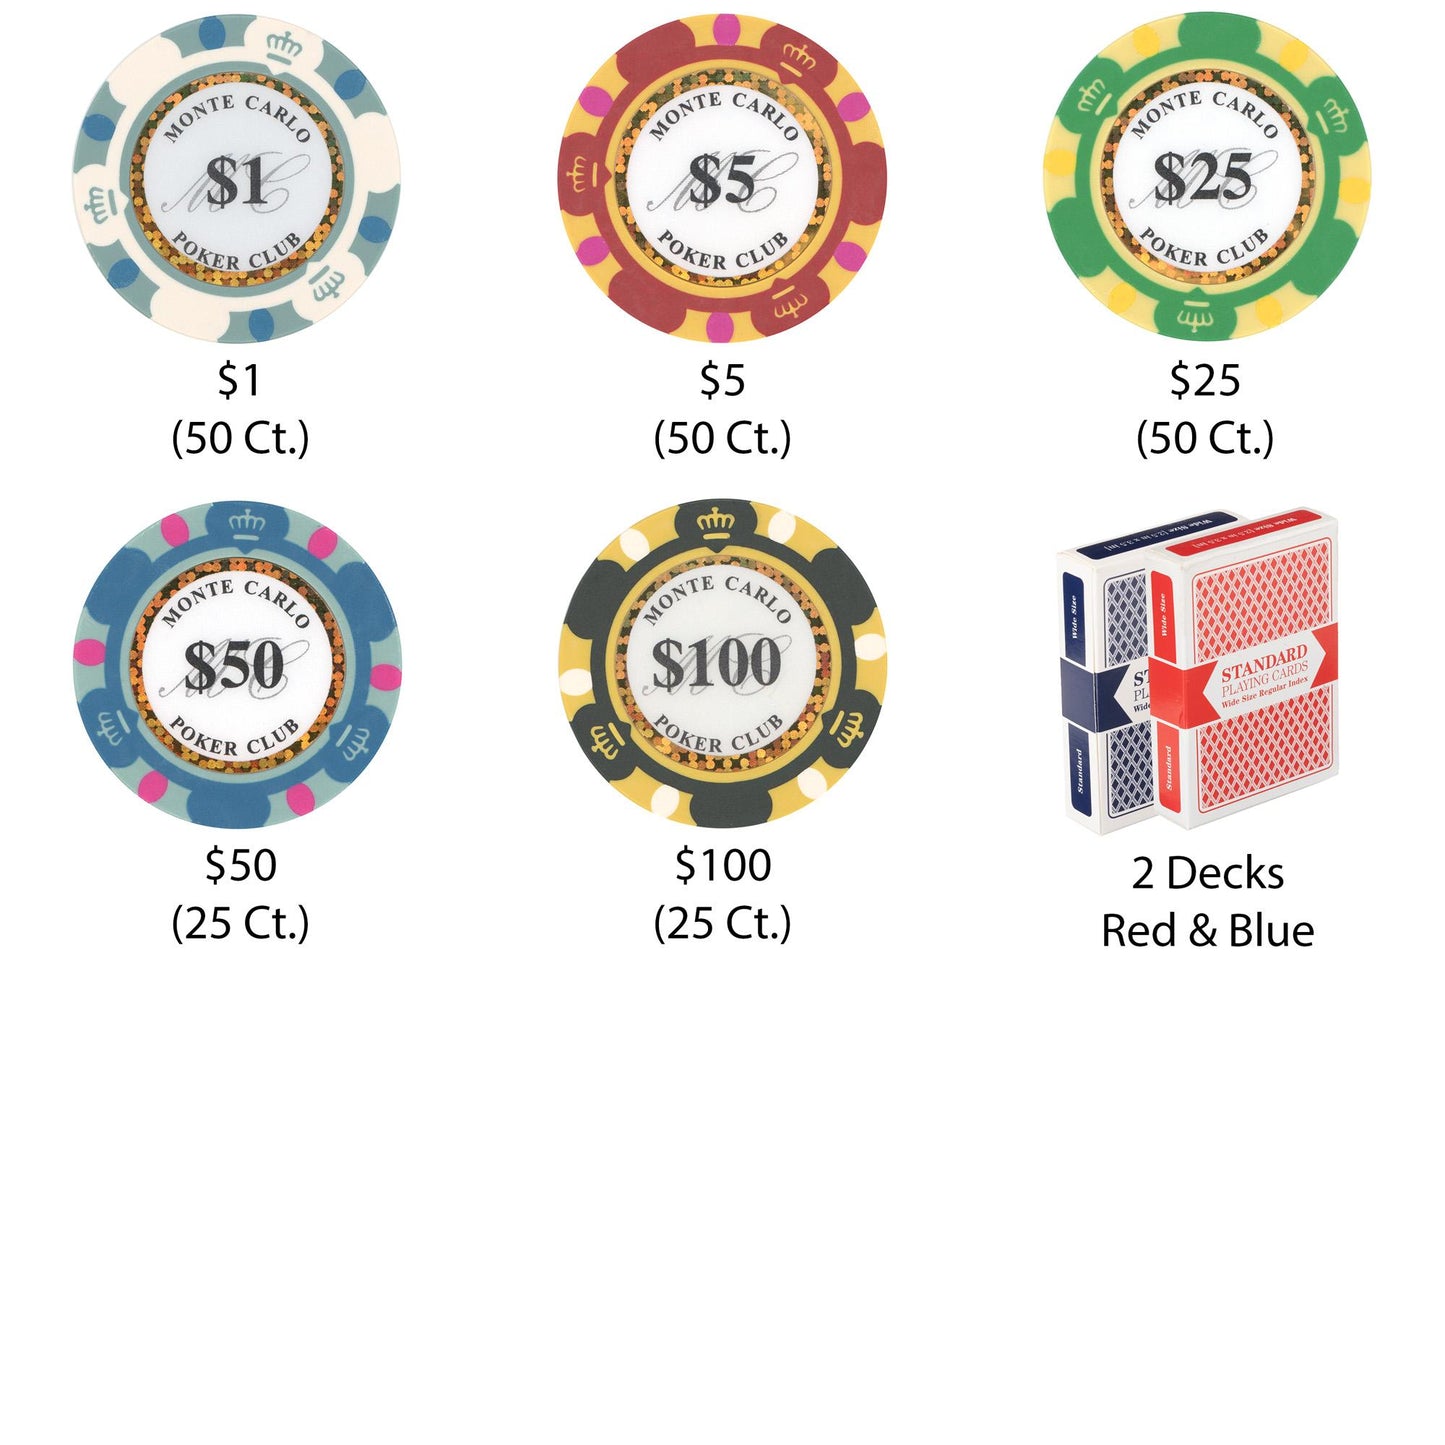 200 Monte Carlo Poker Chips with Wooden Carousel